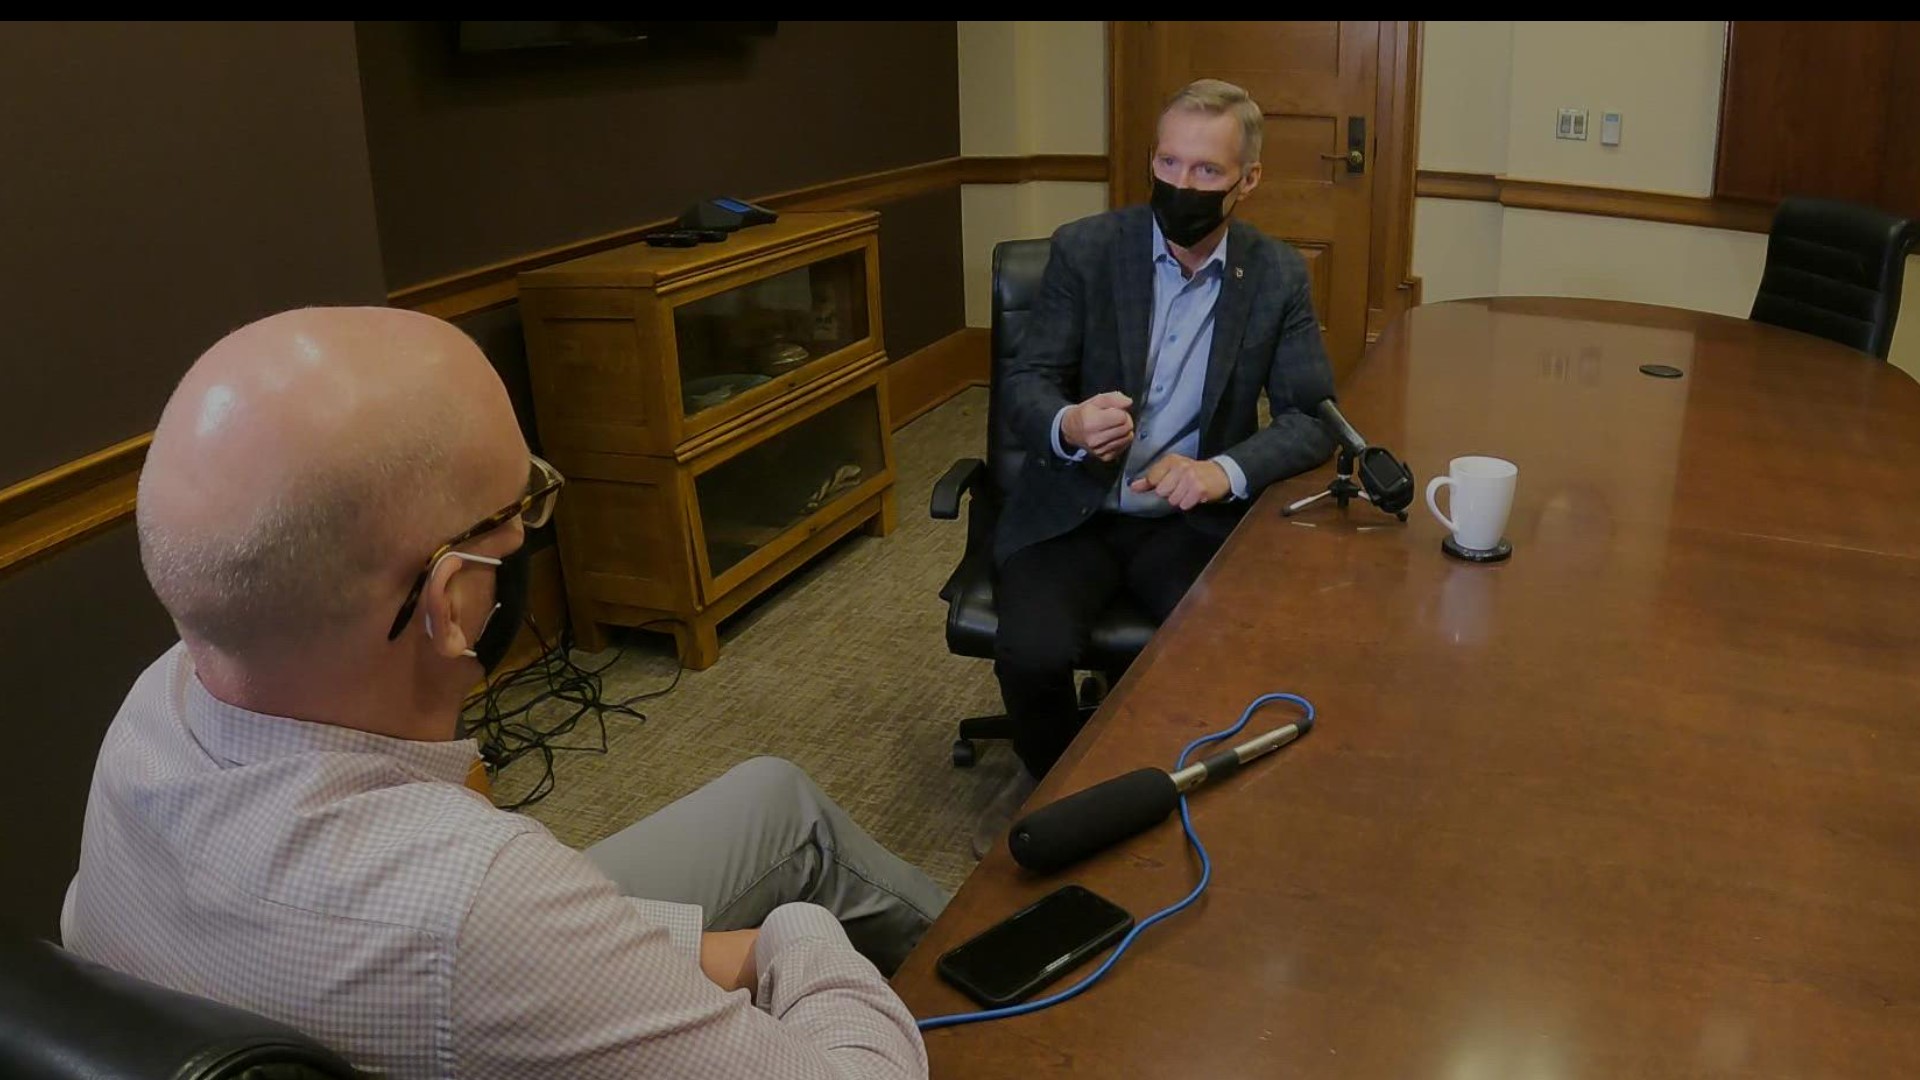 KGW’s Mike Benner sat down with Mayor Wheeler to discuss the surge in shootings, the shortage of police officers and when officers might start wearing body cameras.